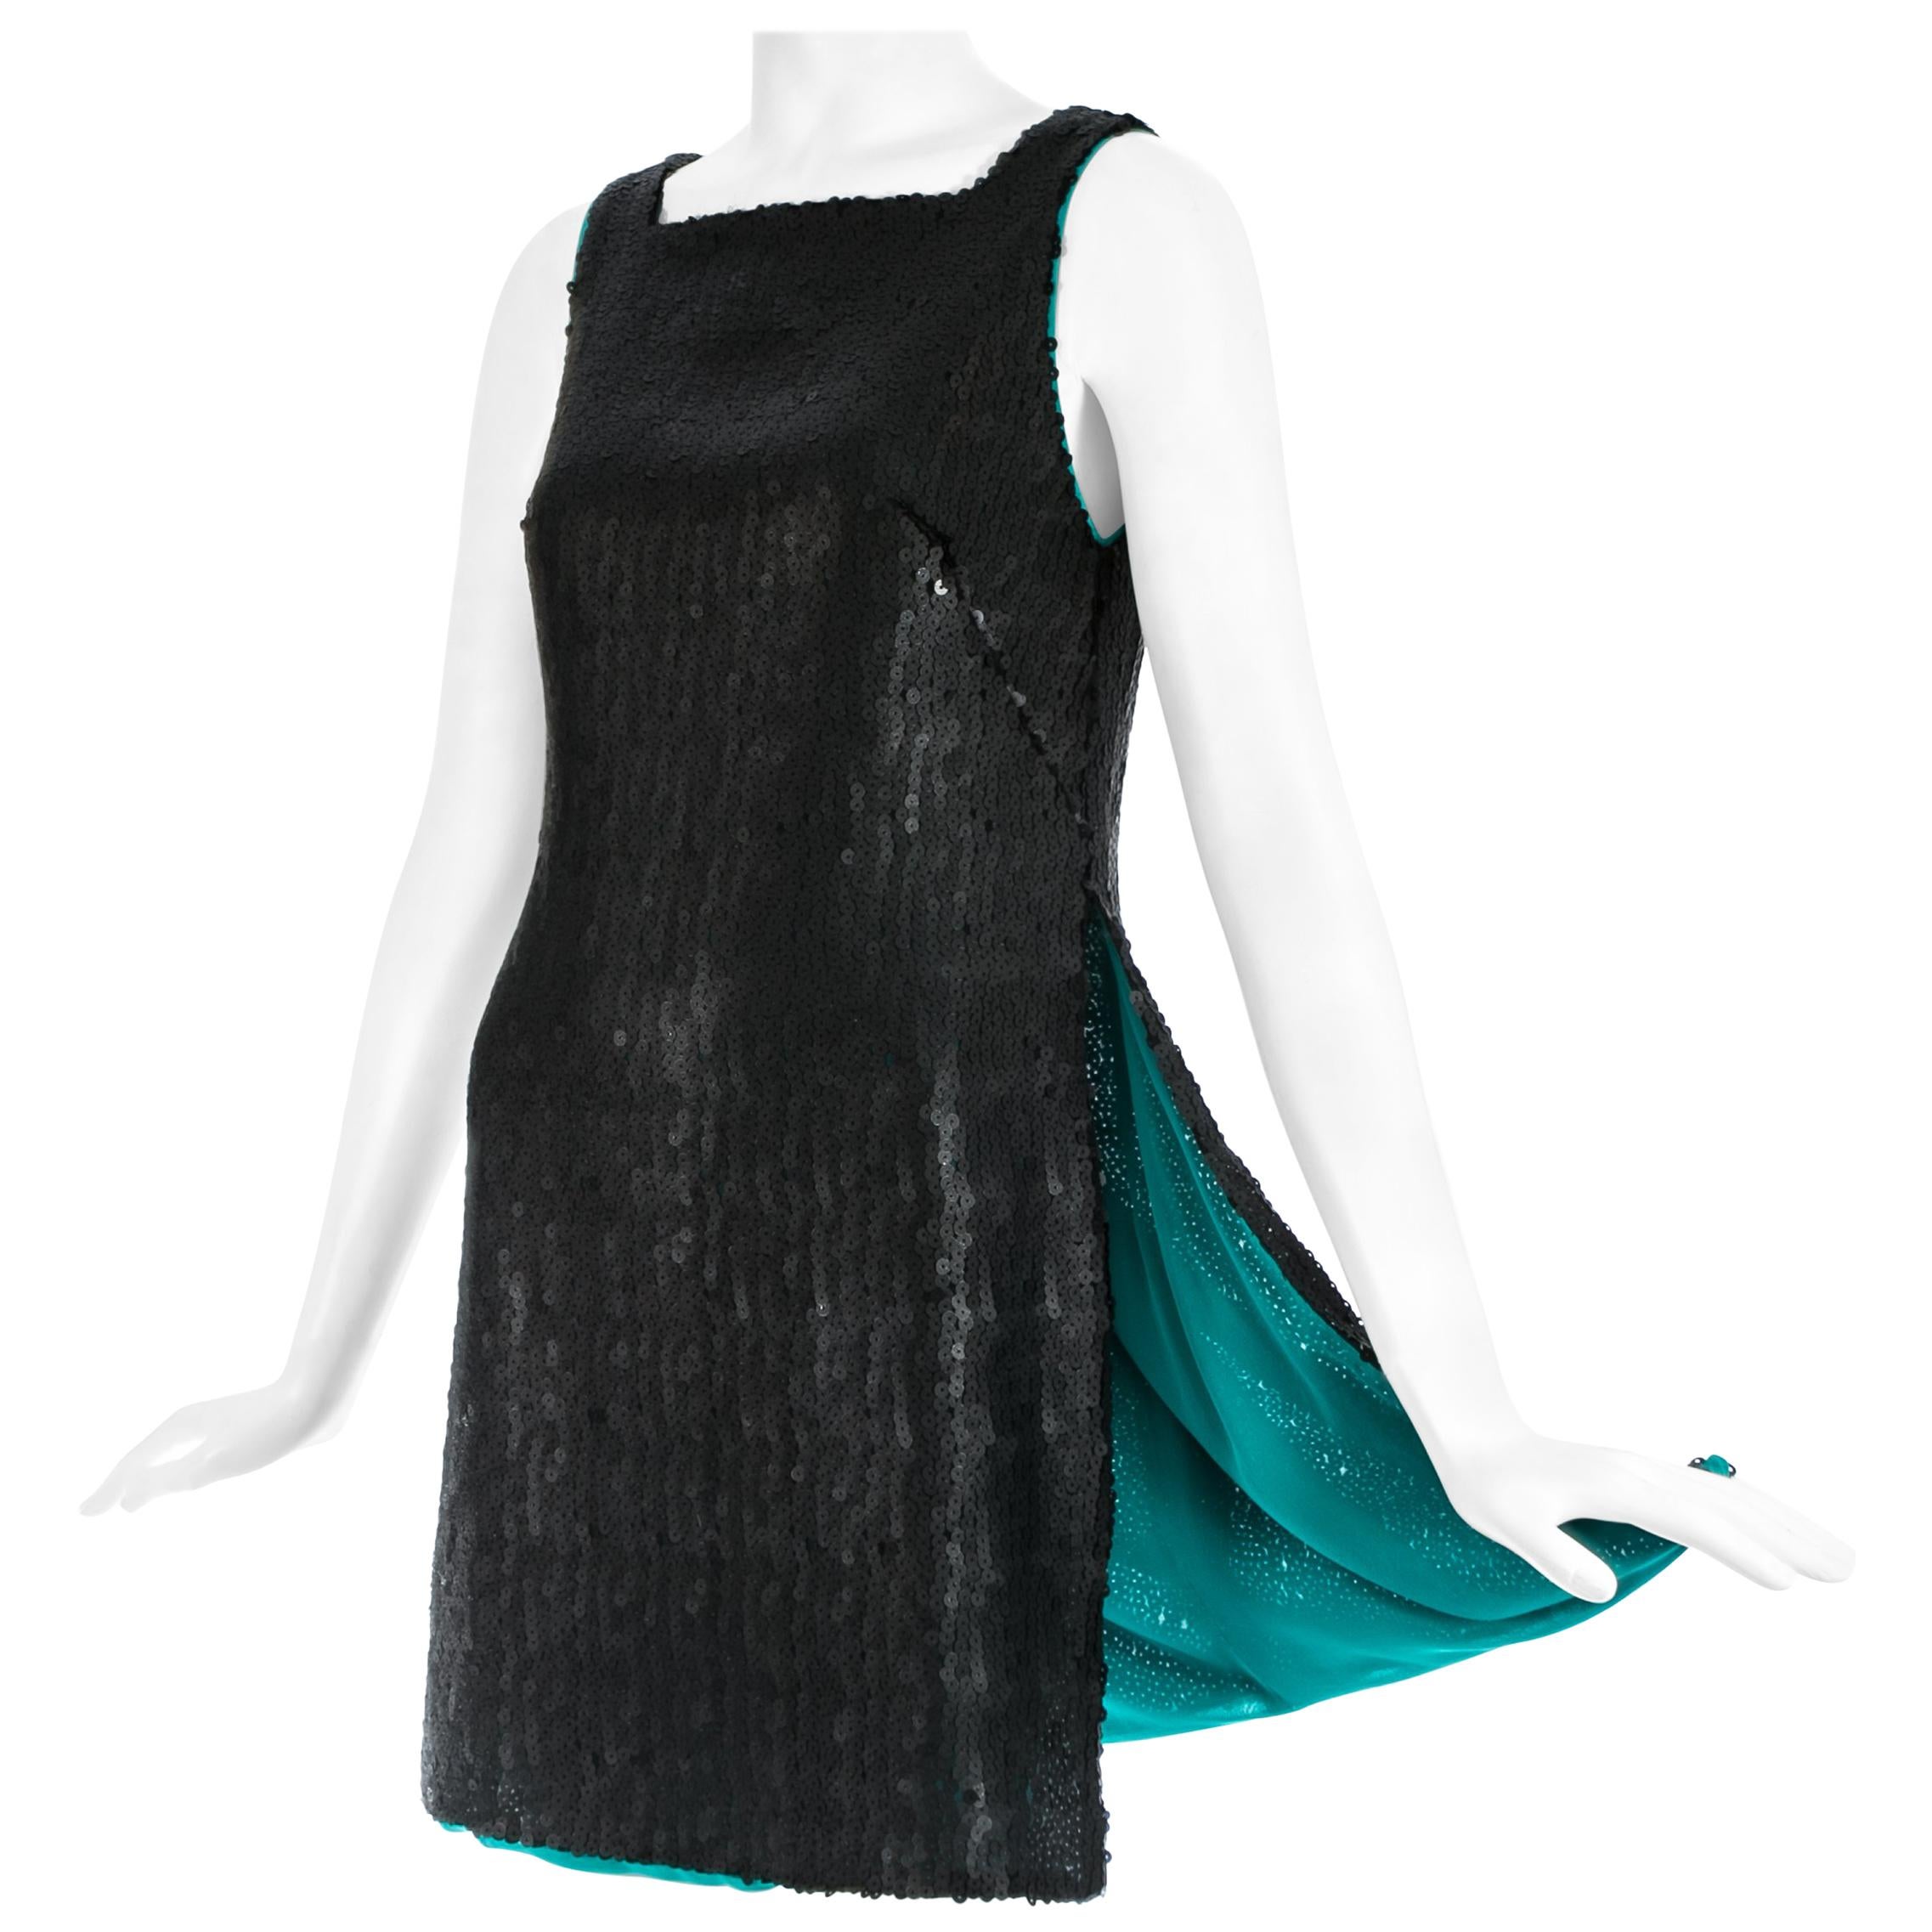 Gianni Versace black sequin mini dress / tunic with high side slits, A/W 1999 For Sale